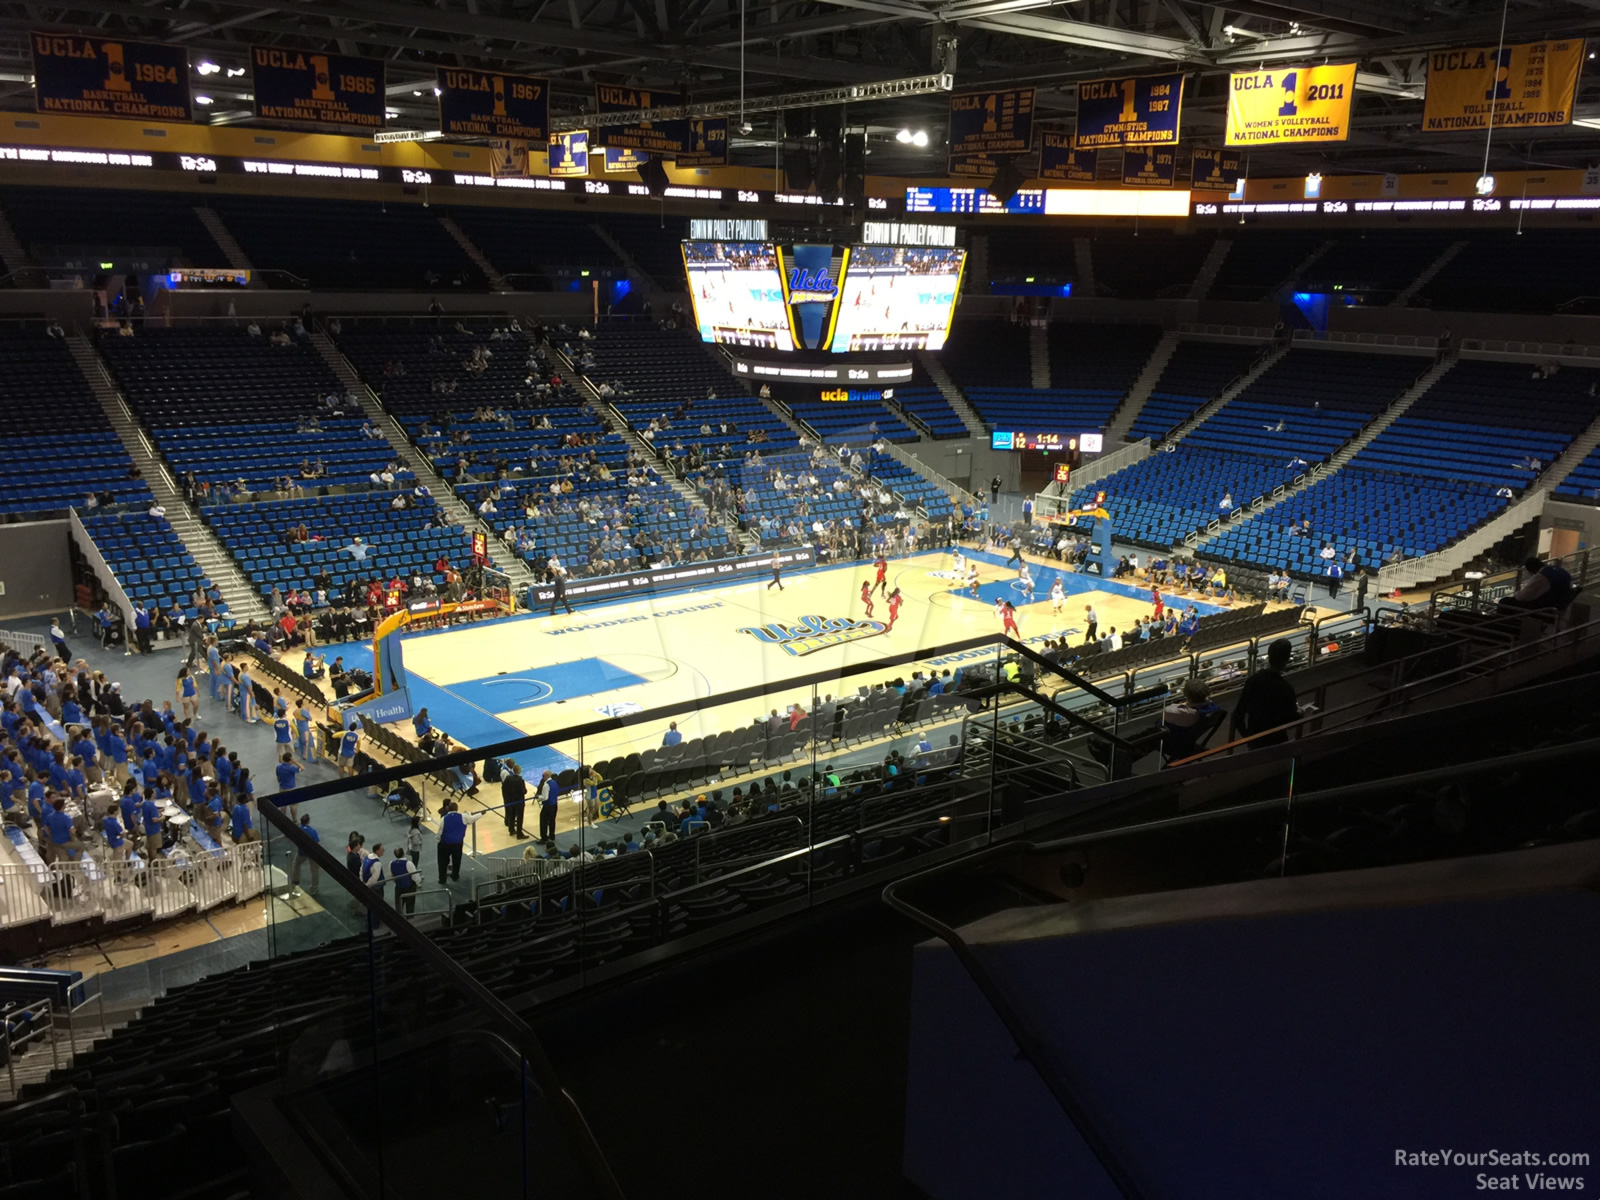 section 218, row 6 seat view  - pauley pavilion